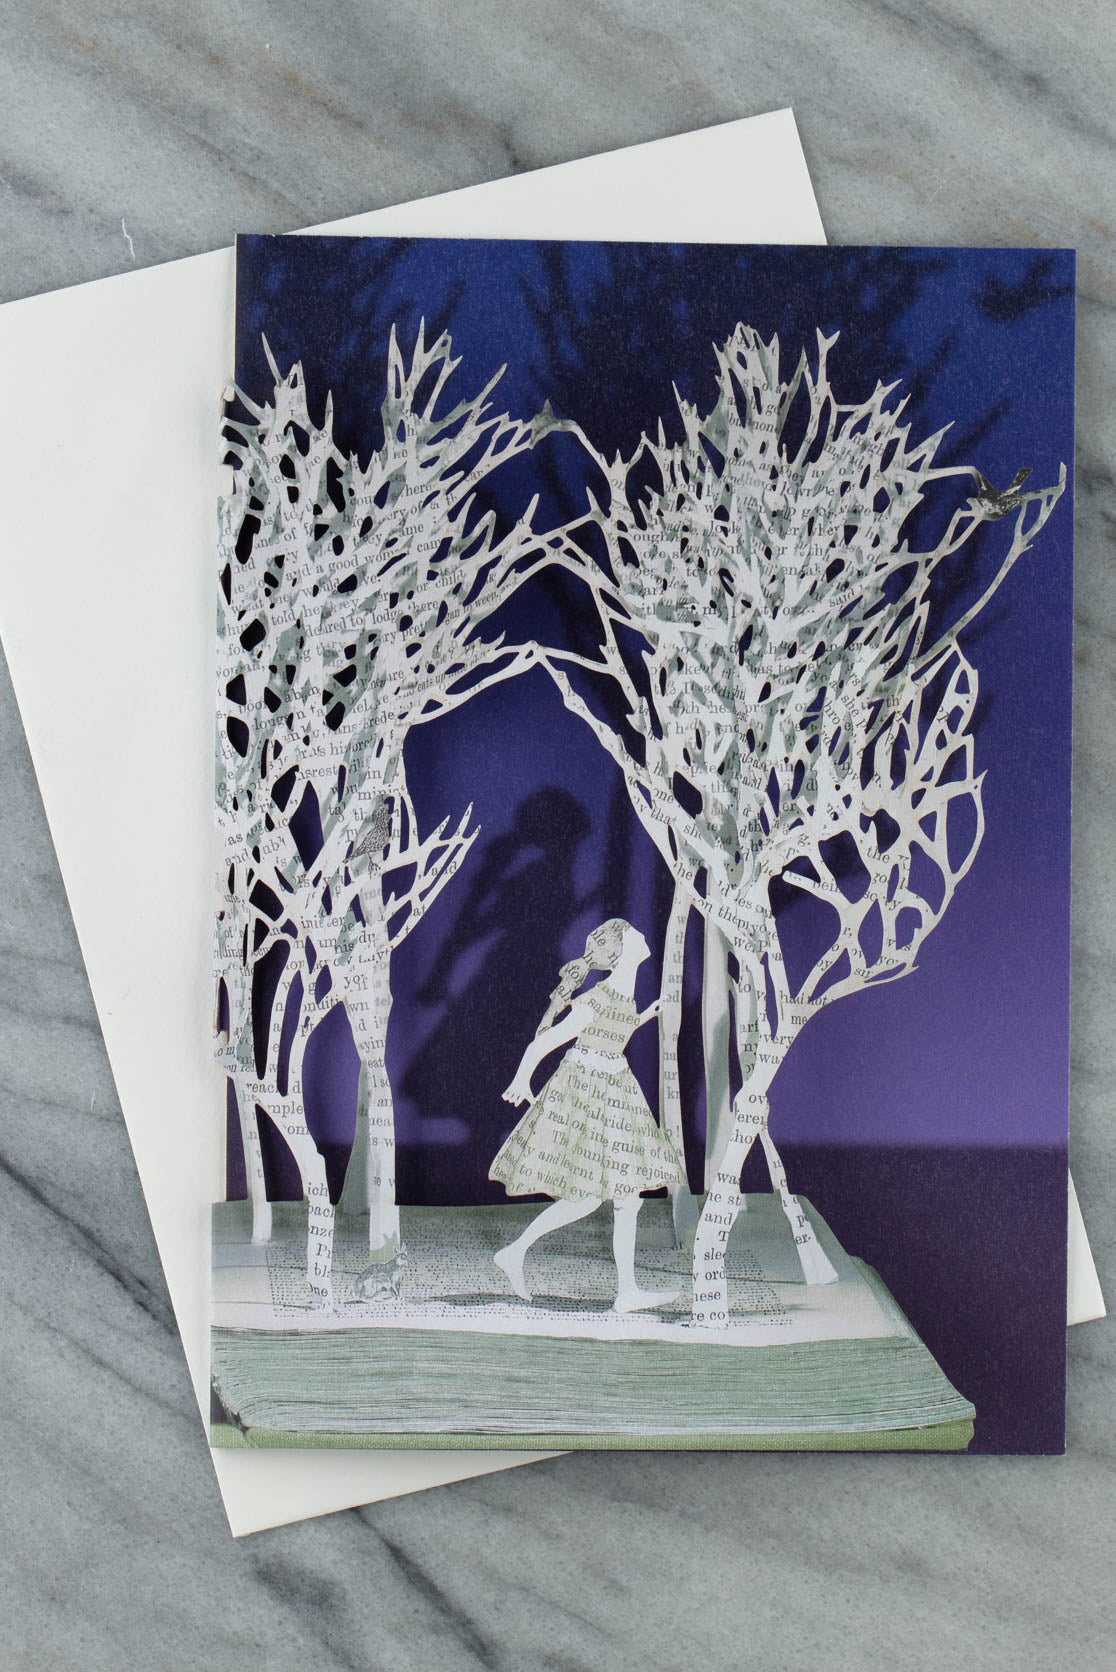 enchanted forest laser-cut greetings card by su blackwerll for roger la borde